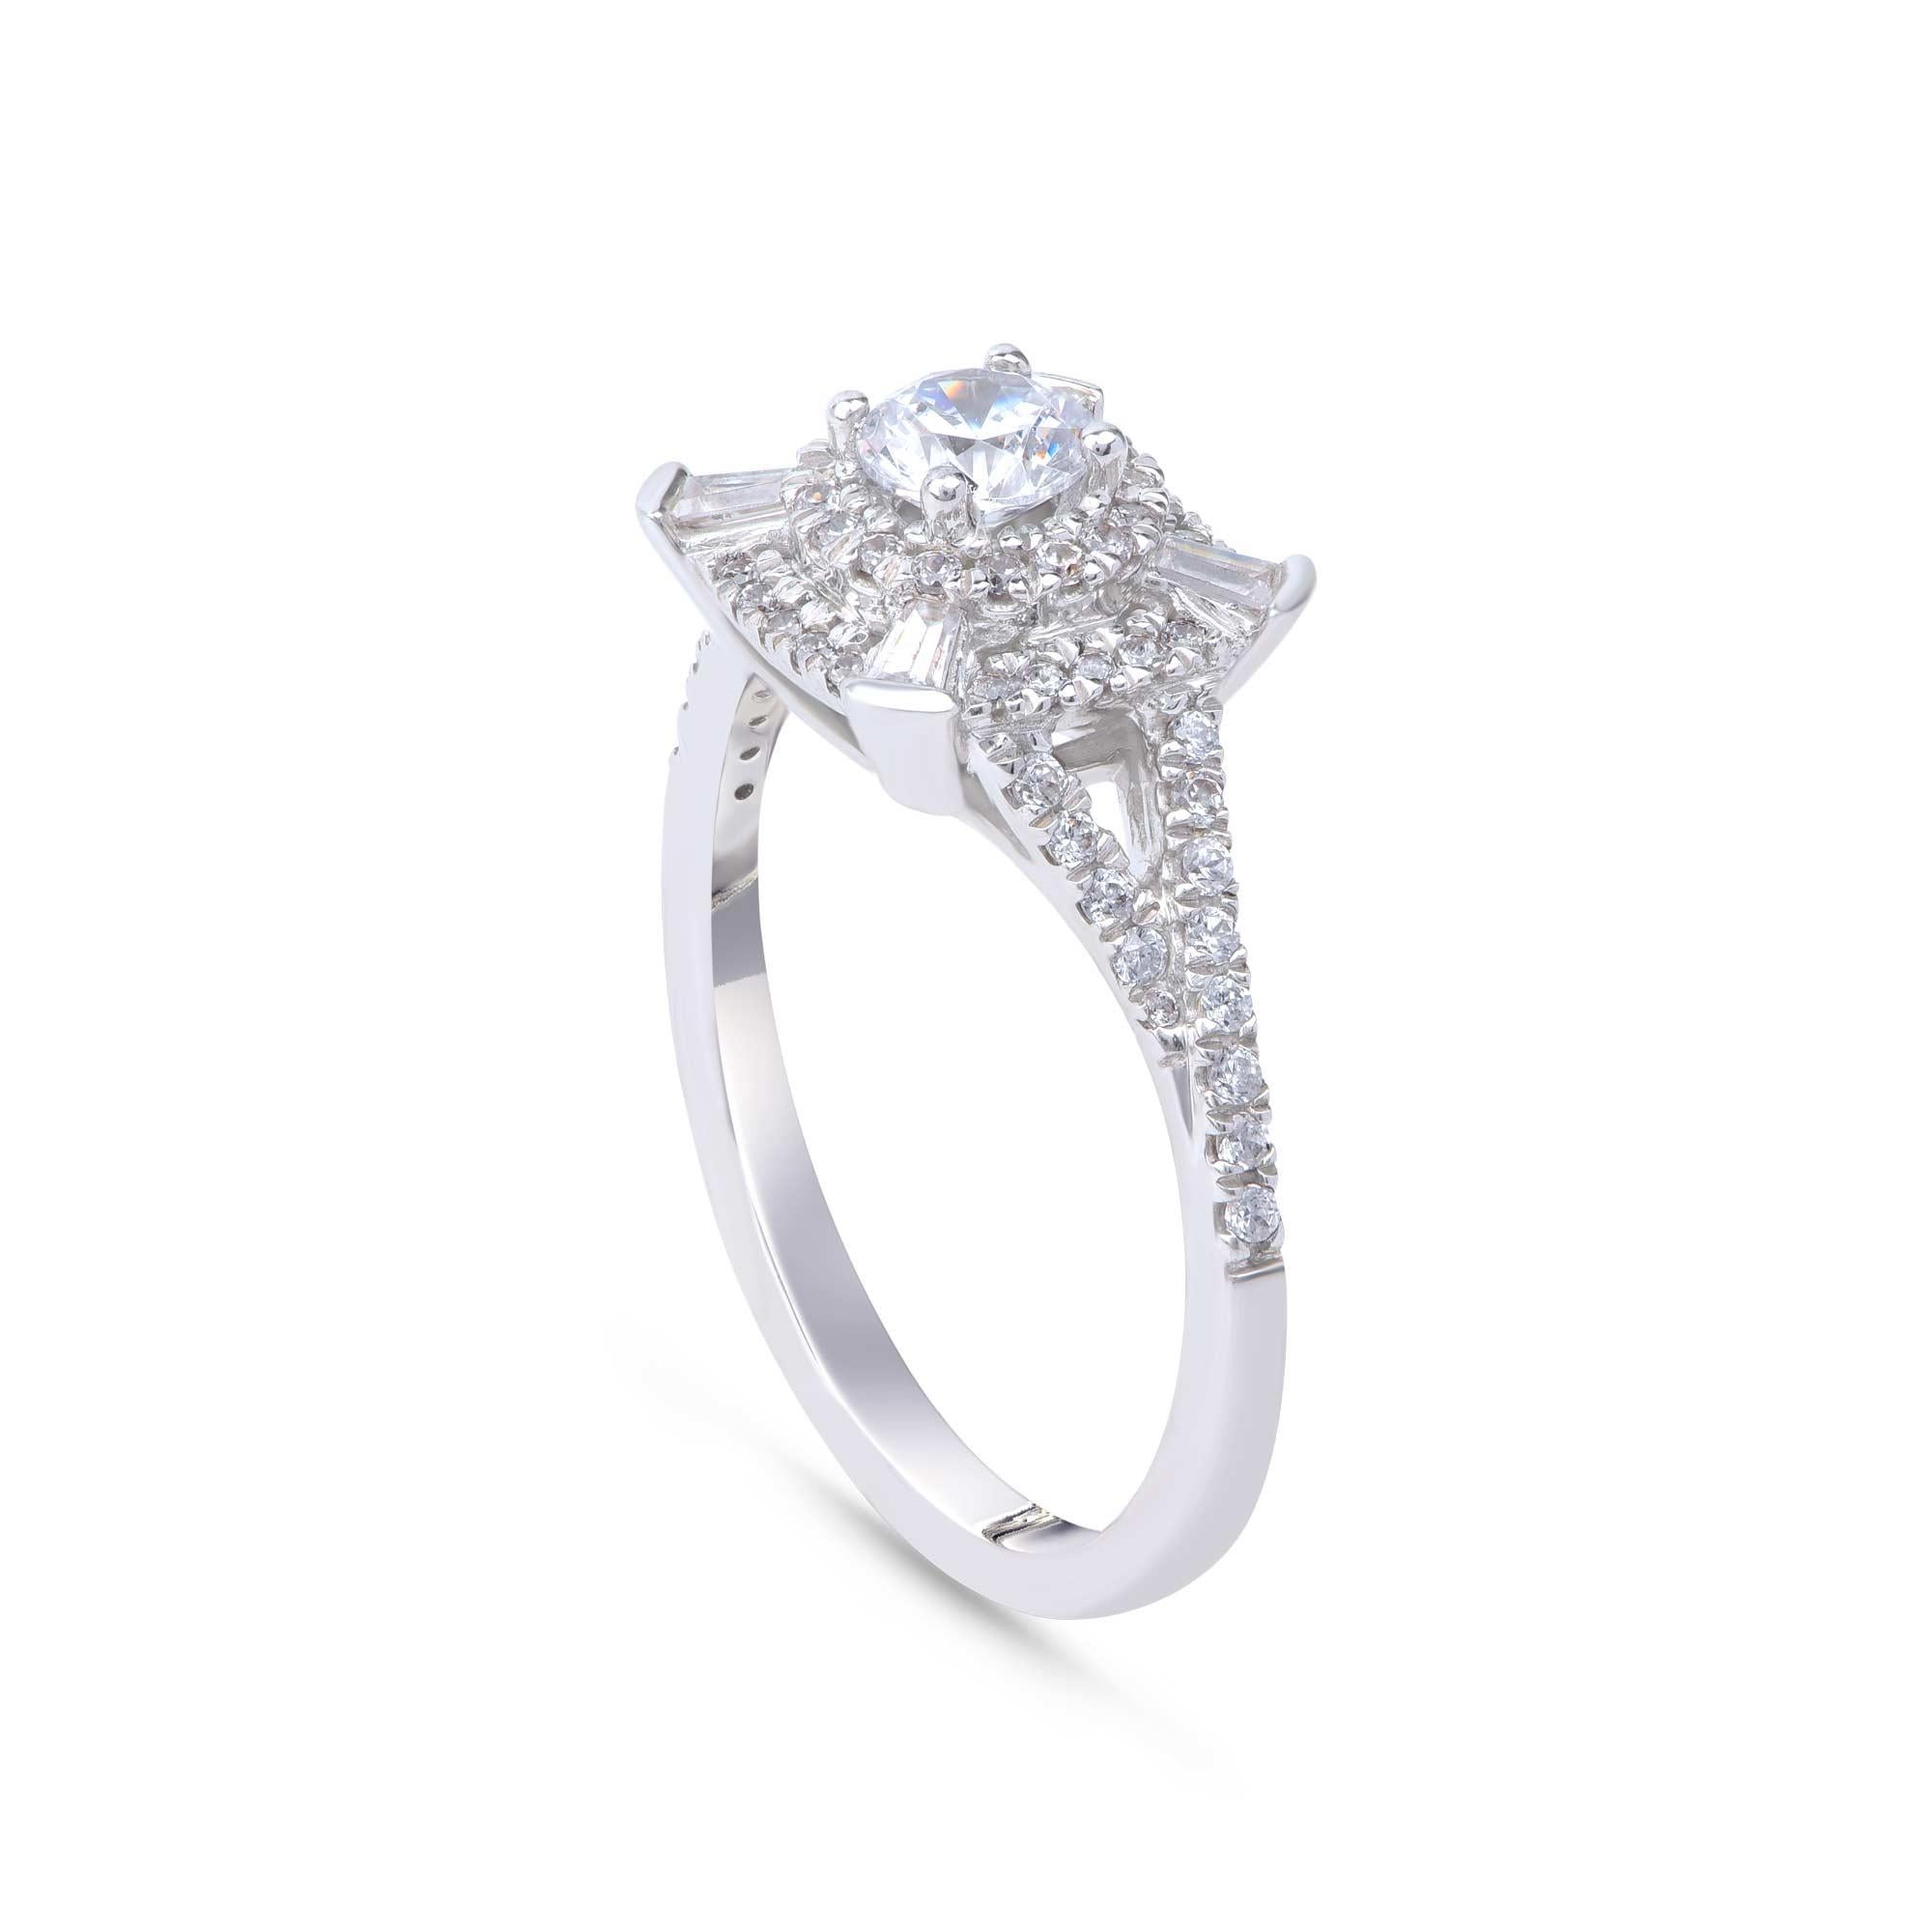 Beautifully studded with 63 brilliant and 8 baguette natural diamonds in prong, micro-prong and channel setting and designed in 18-karat white gold. Diamonds are graded H Color, I1 Clarity. 

Metal color and ring size can be customized on request.